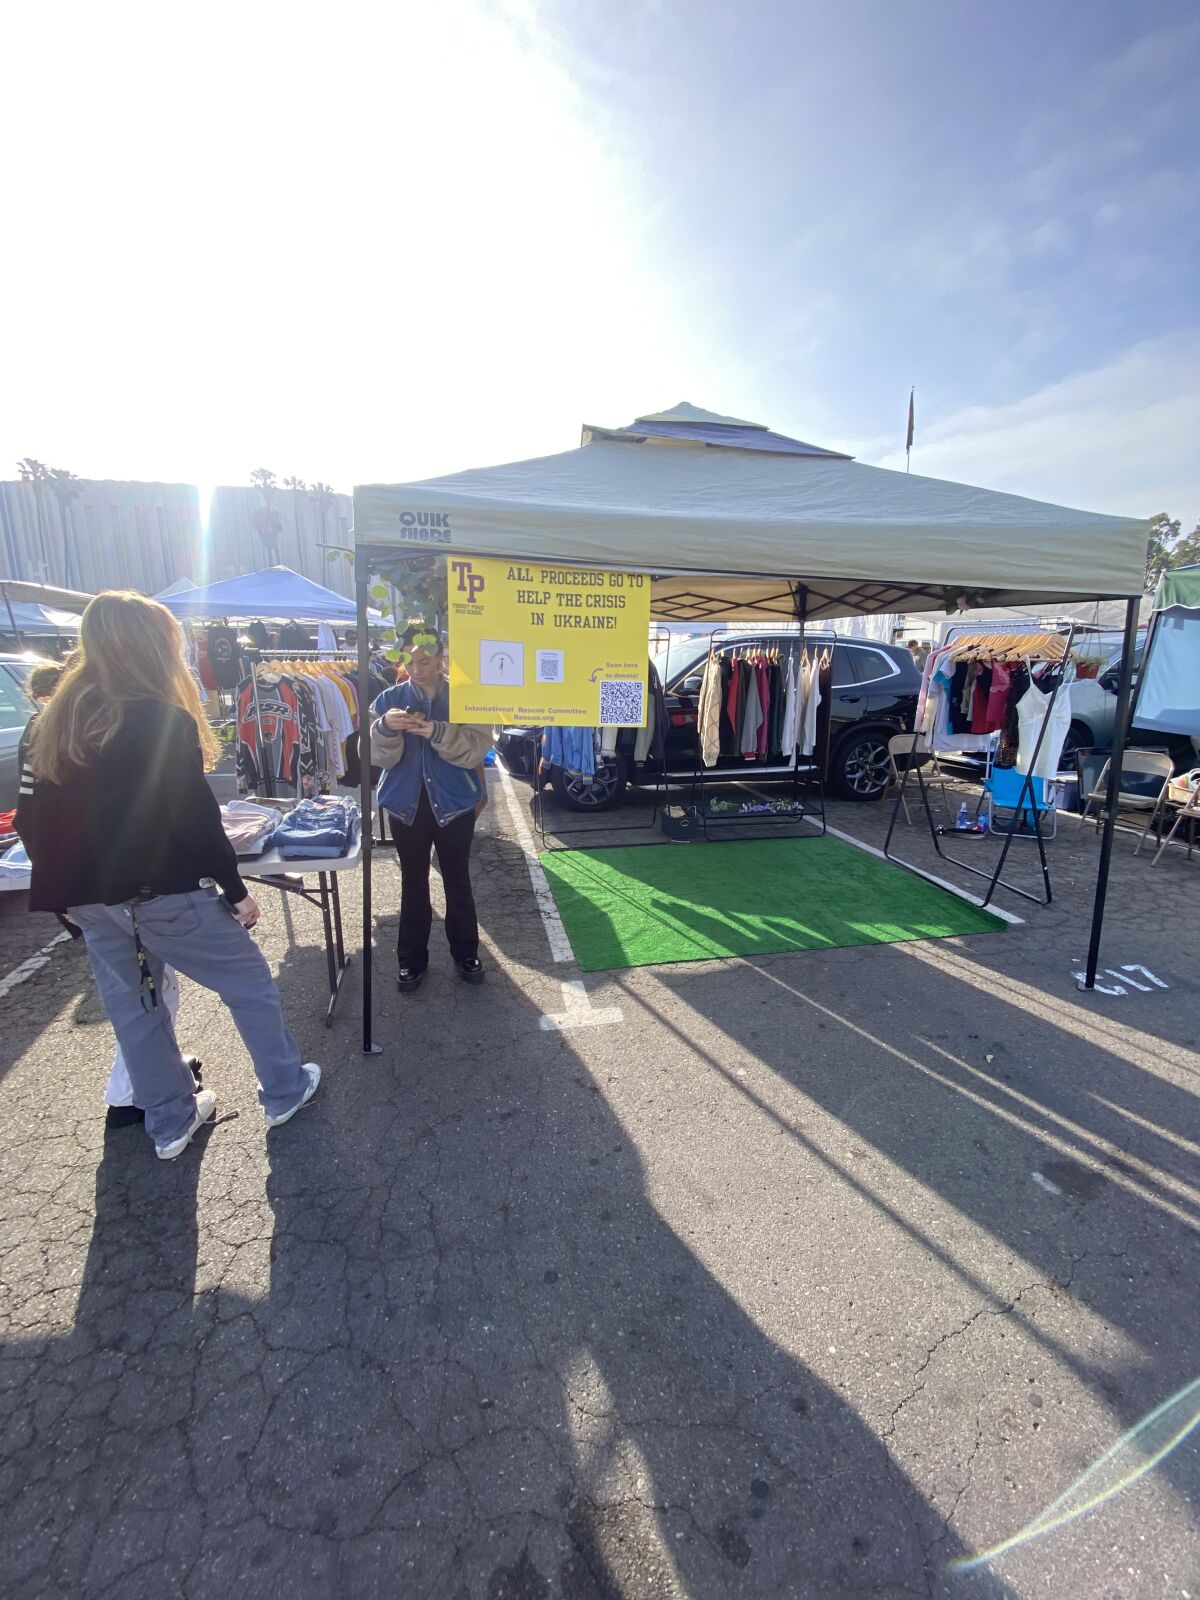 Torrey Pines students sold clothing at the swap meet to raise money for Ukraine.